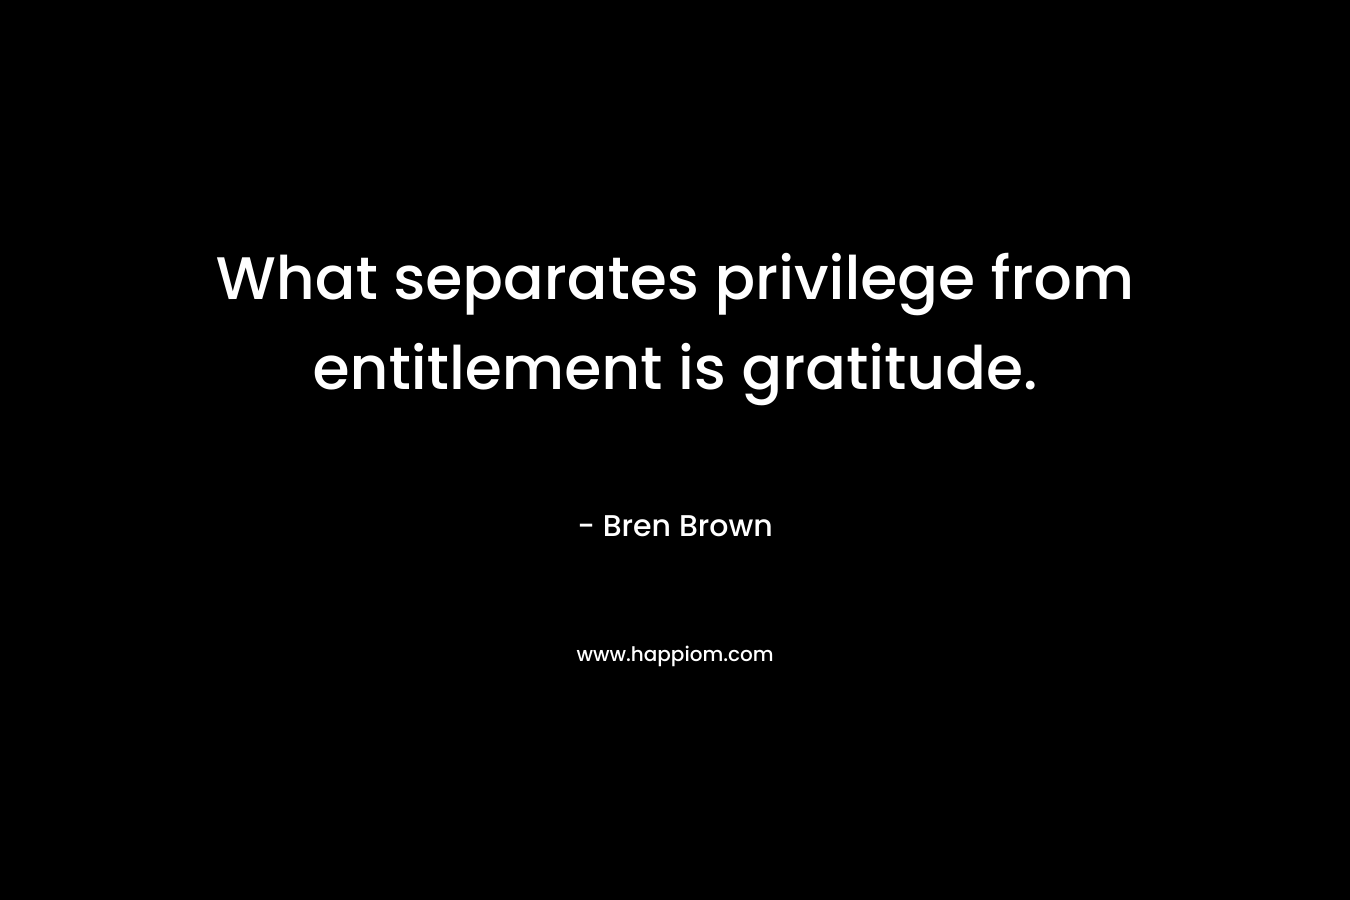 What separates privilege from entitlement is gratitude. – Bren Brown